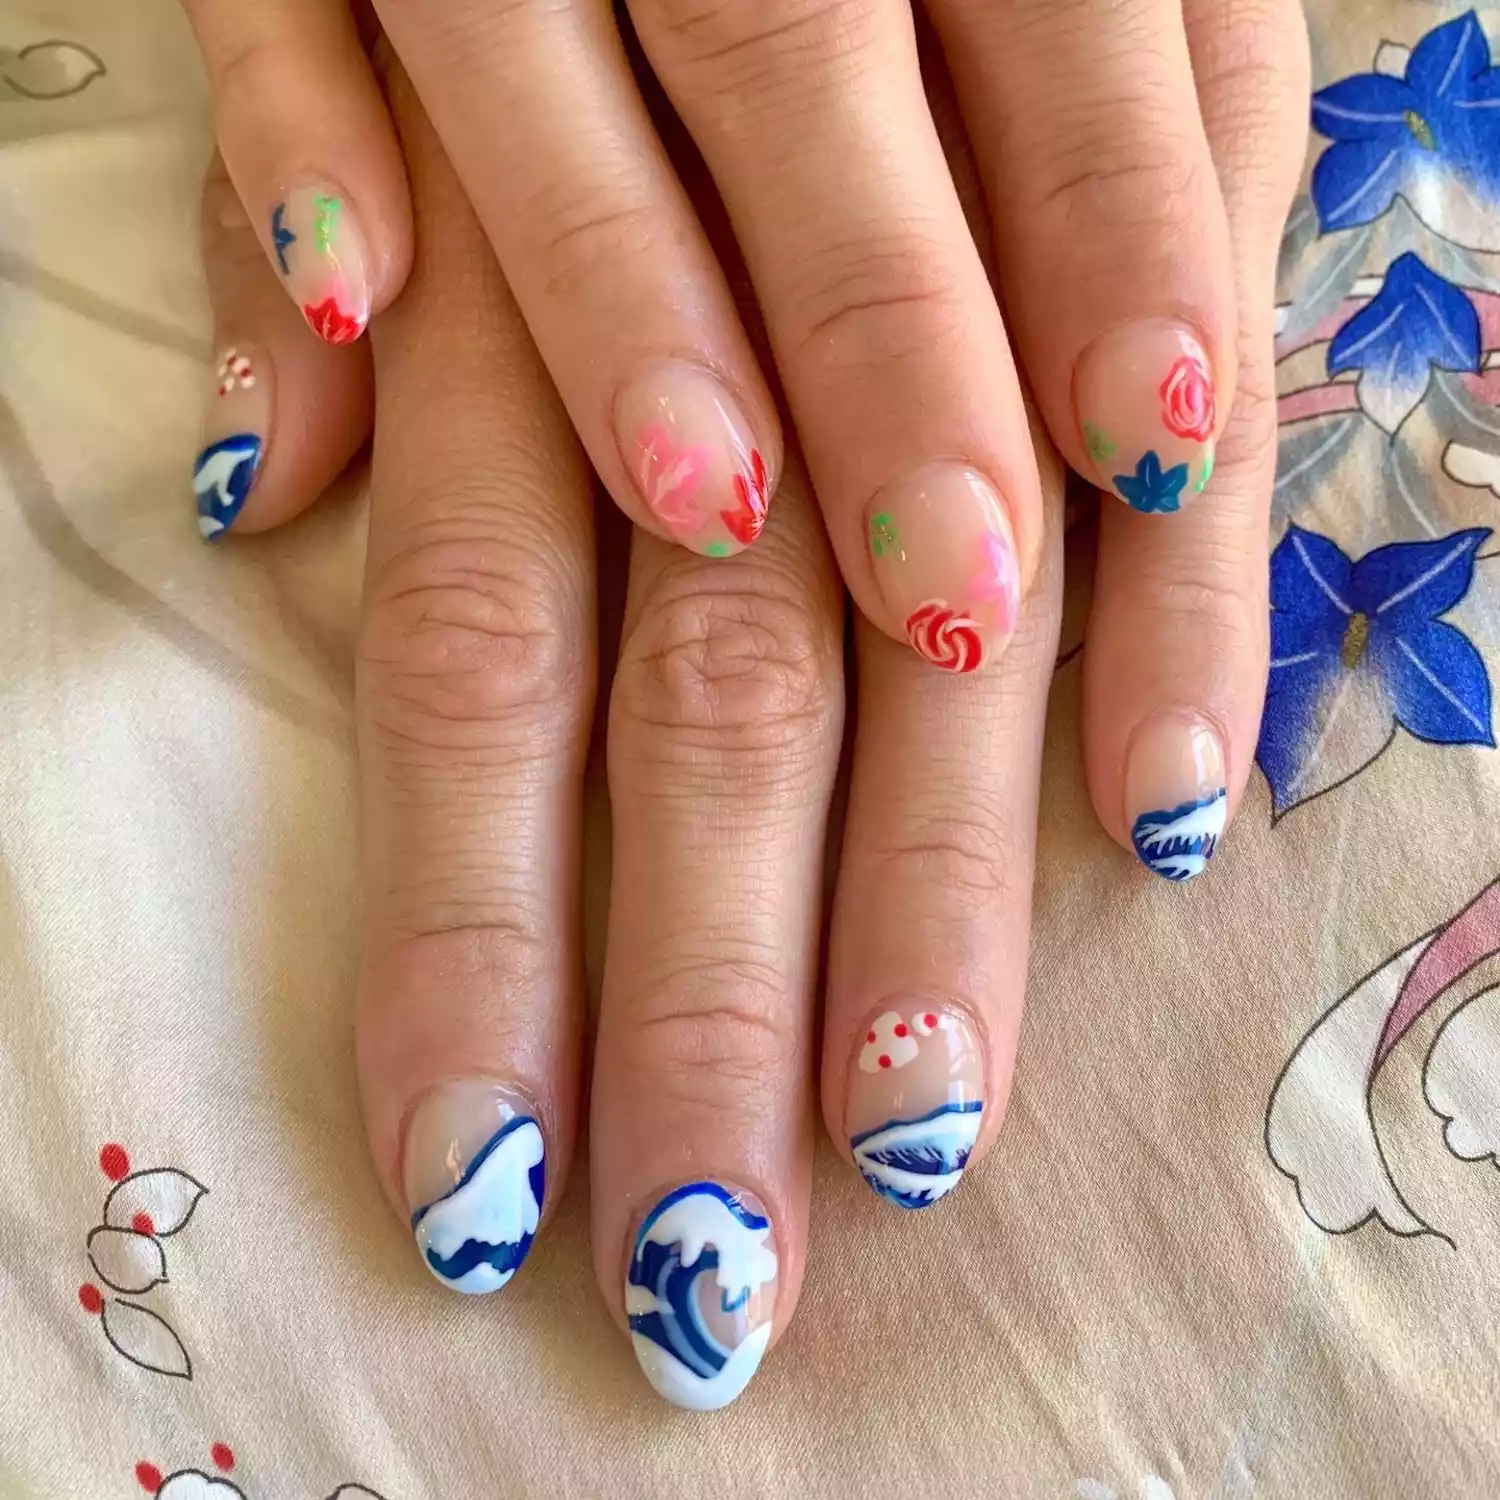 Manicure with one hand of Hokusai wave designs and one hand of island floral designs